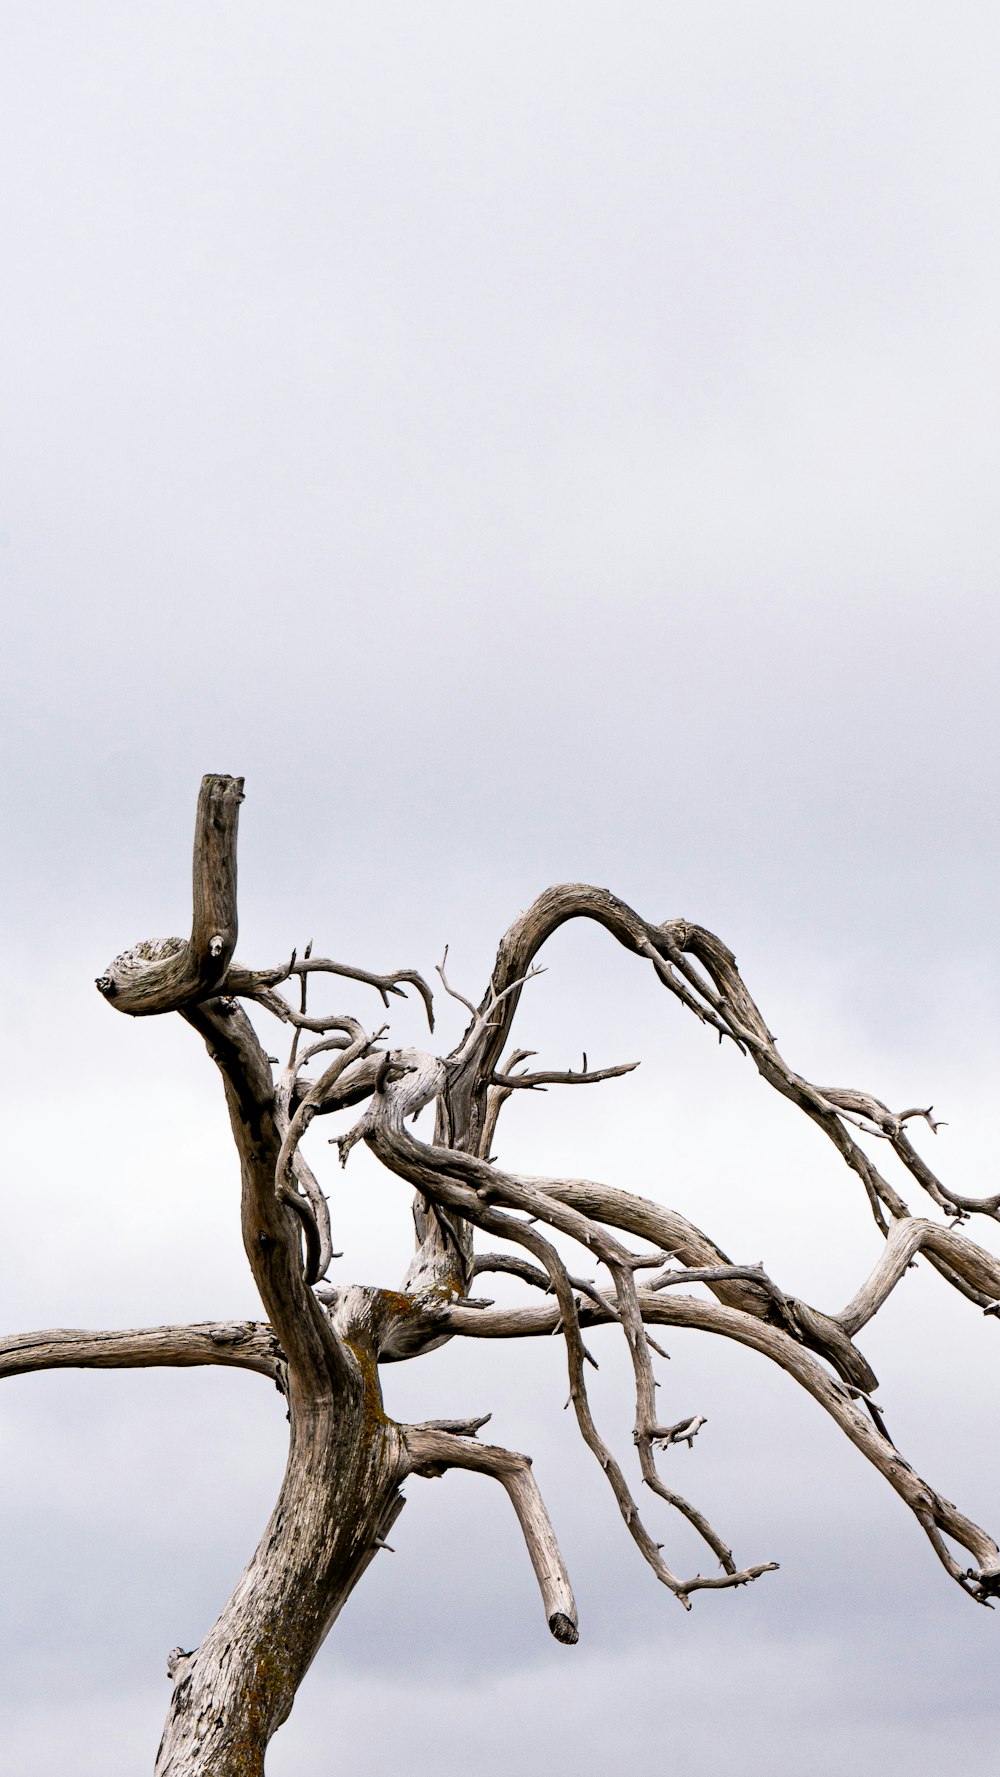 withered tree under gray sky